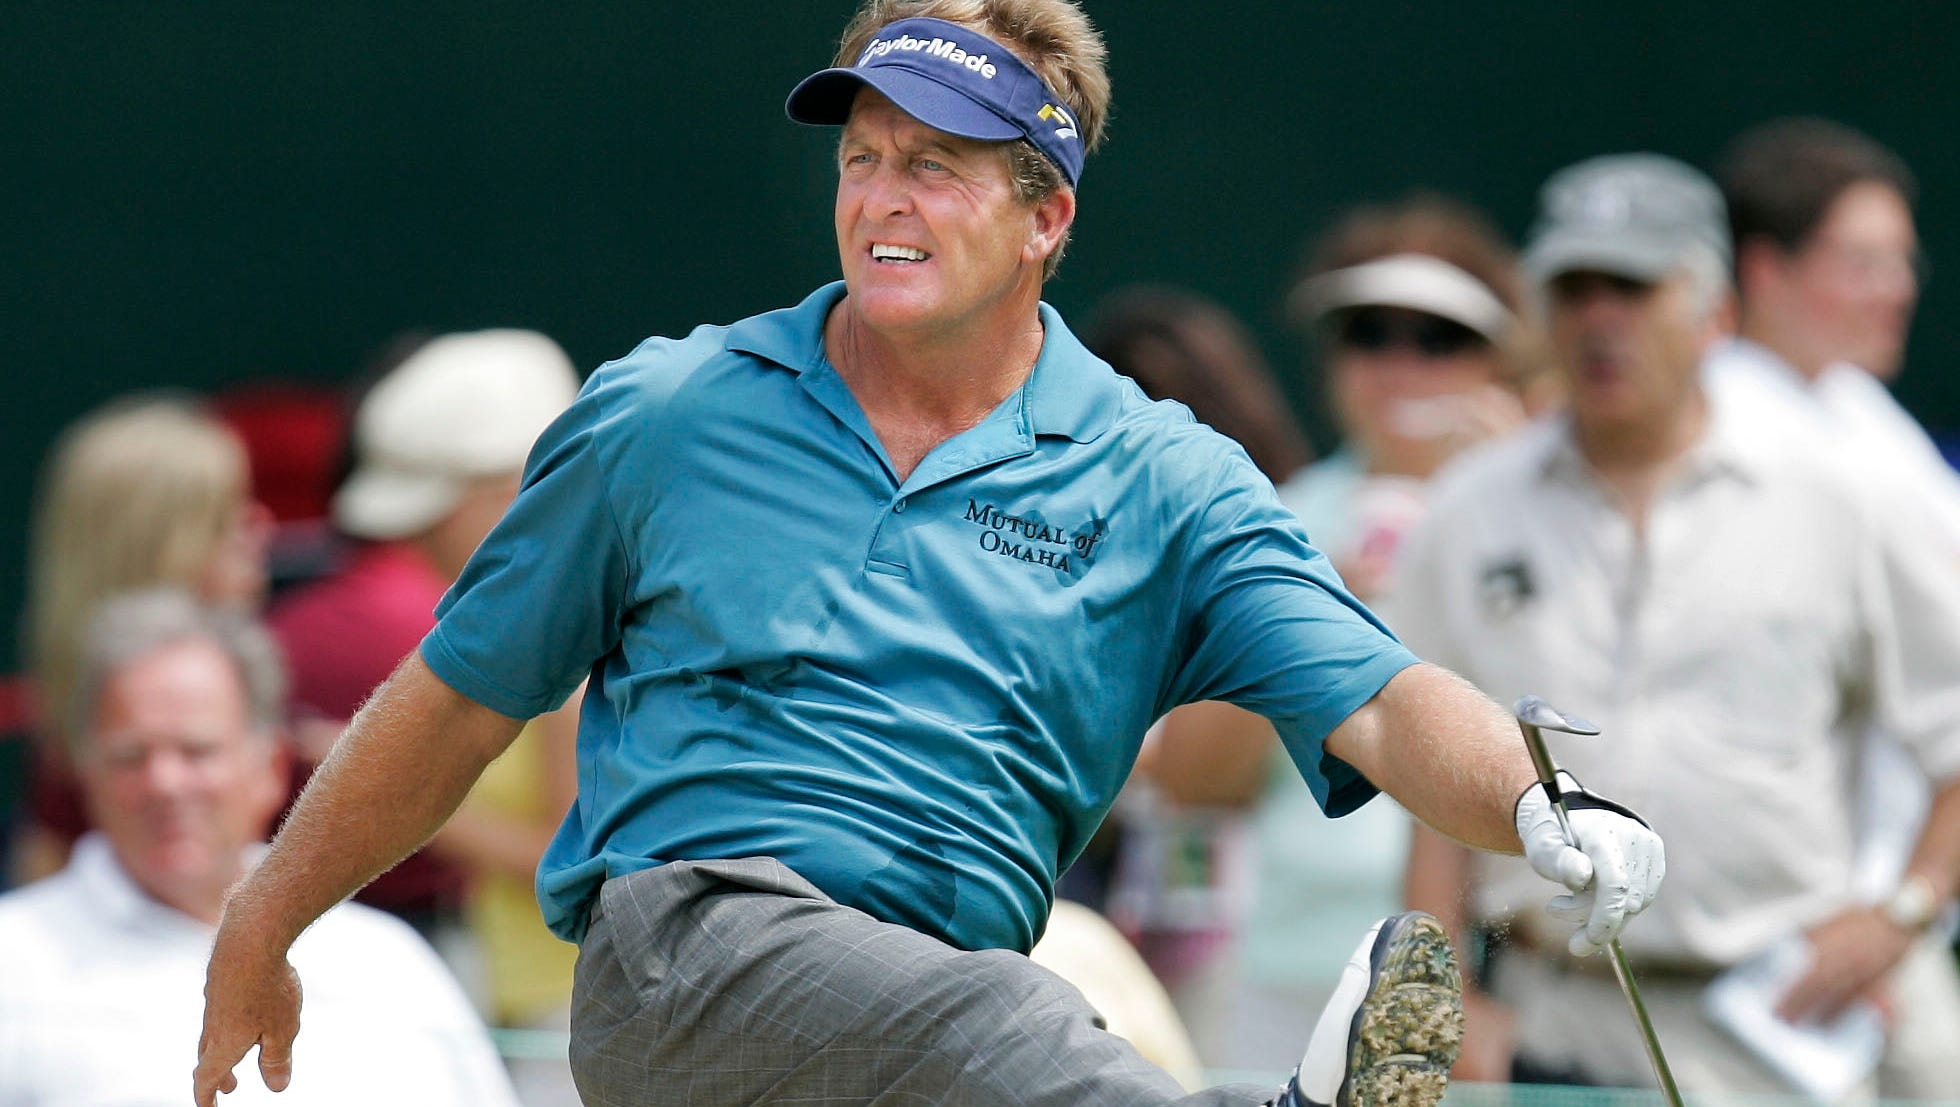 Fred Funk tries a little dance to get his sand shot into the hole on the 18th green at the 2008 Buick Open.